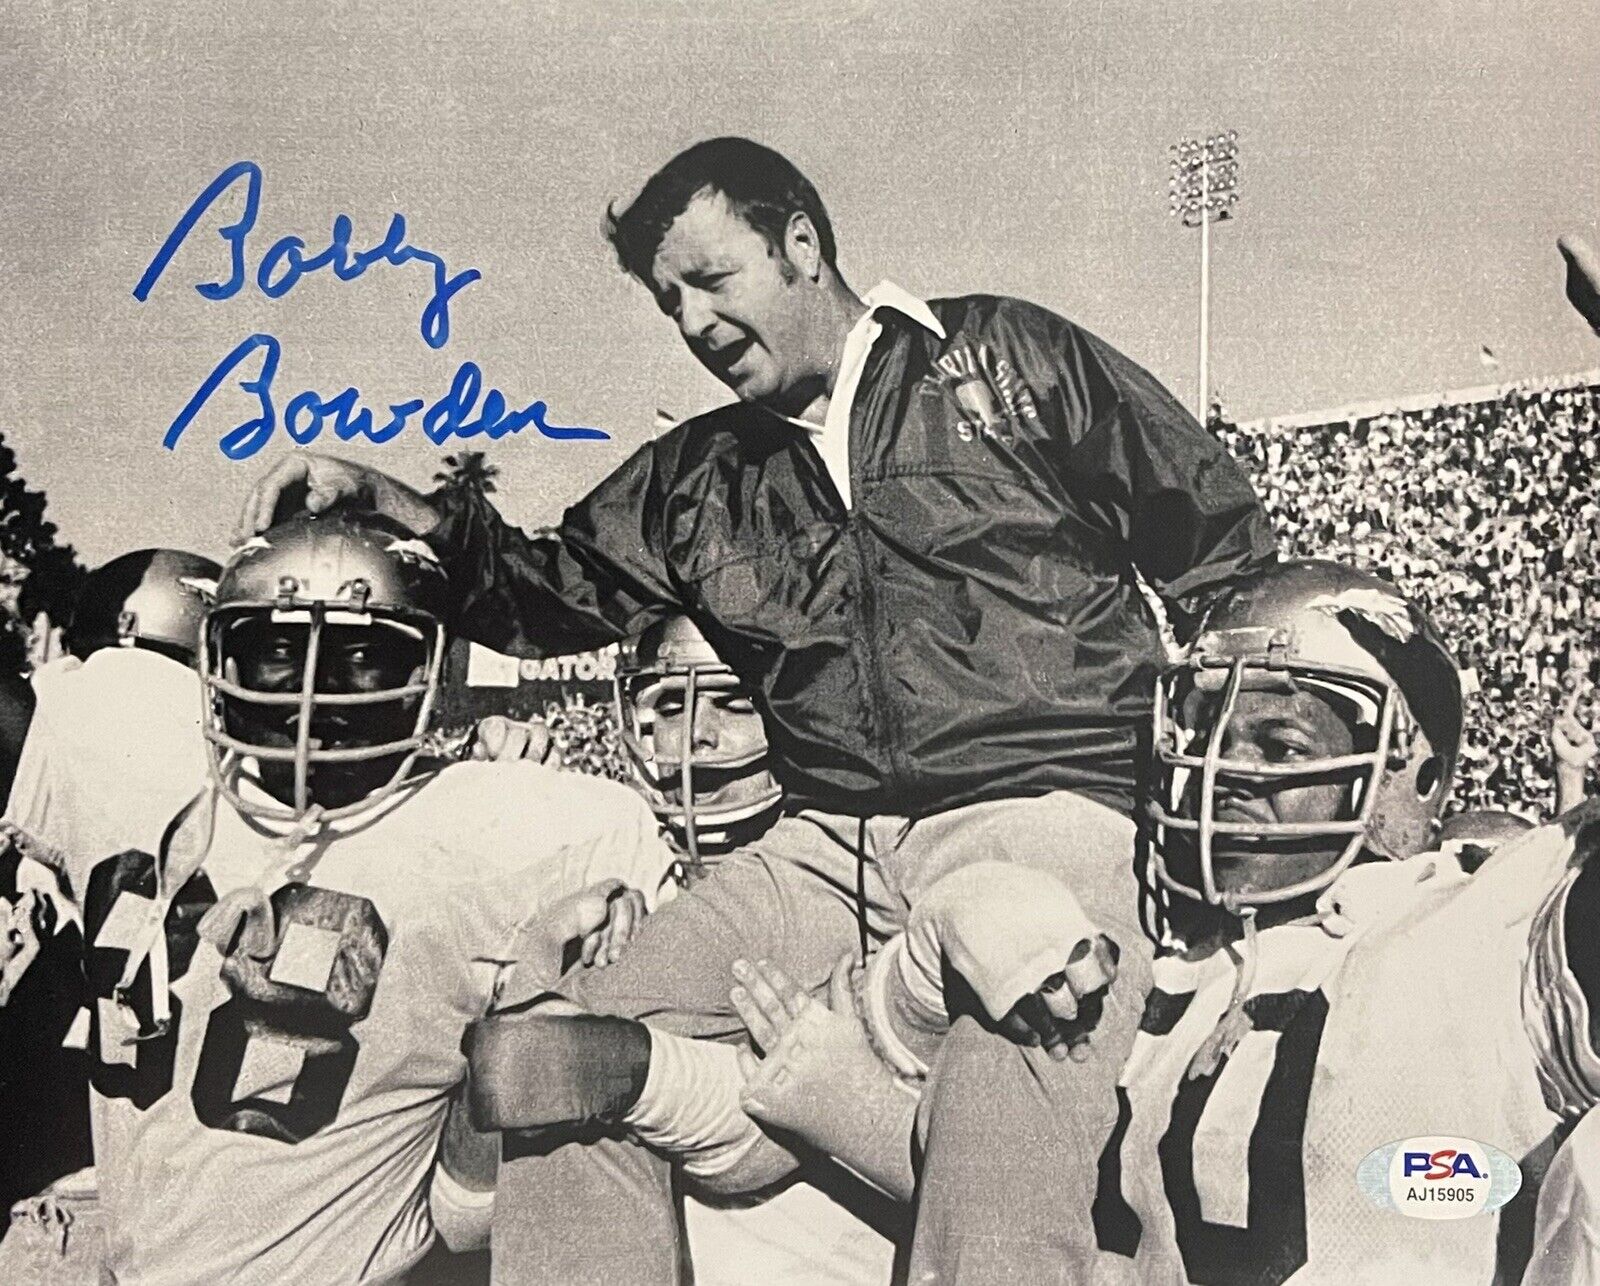 Bobby Bowden Signed Autographed Florida State Seminoles 8x10 Photo Poster painting WVU PSA/DNA